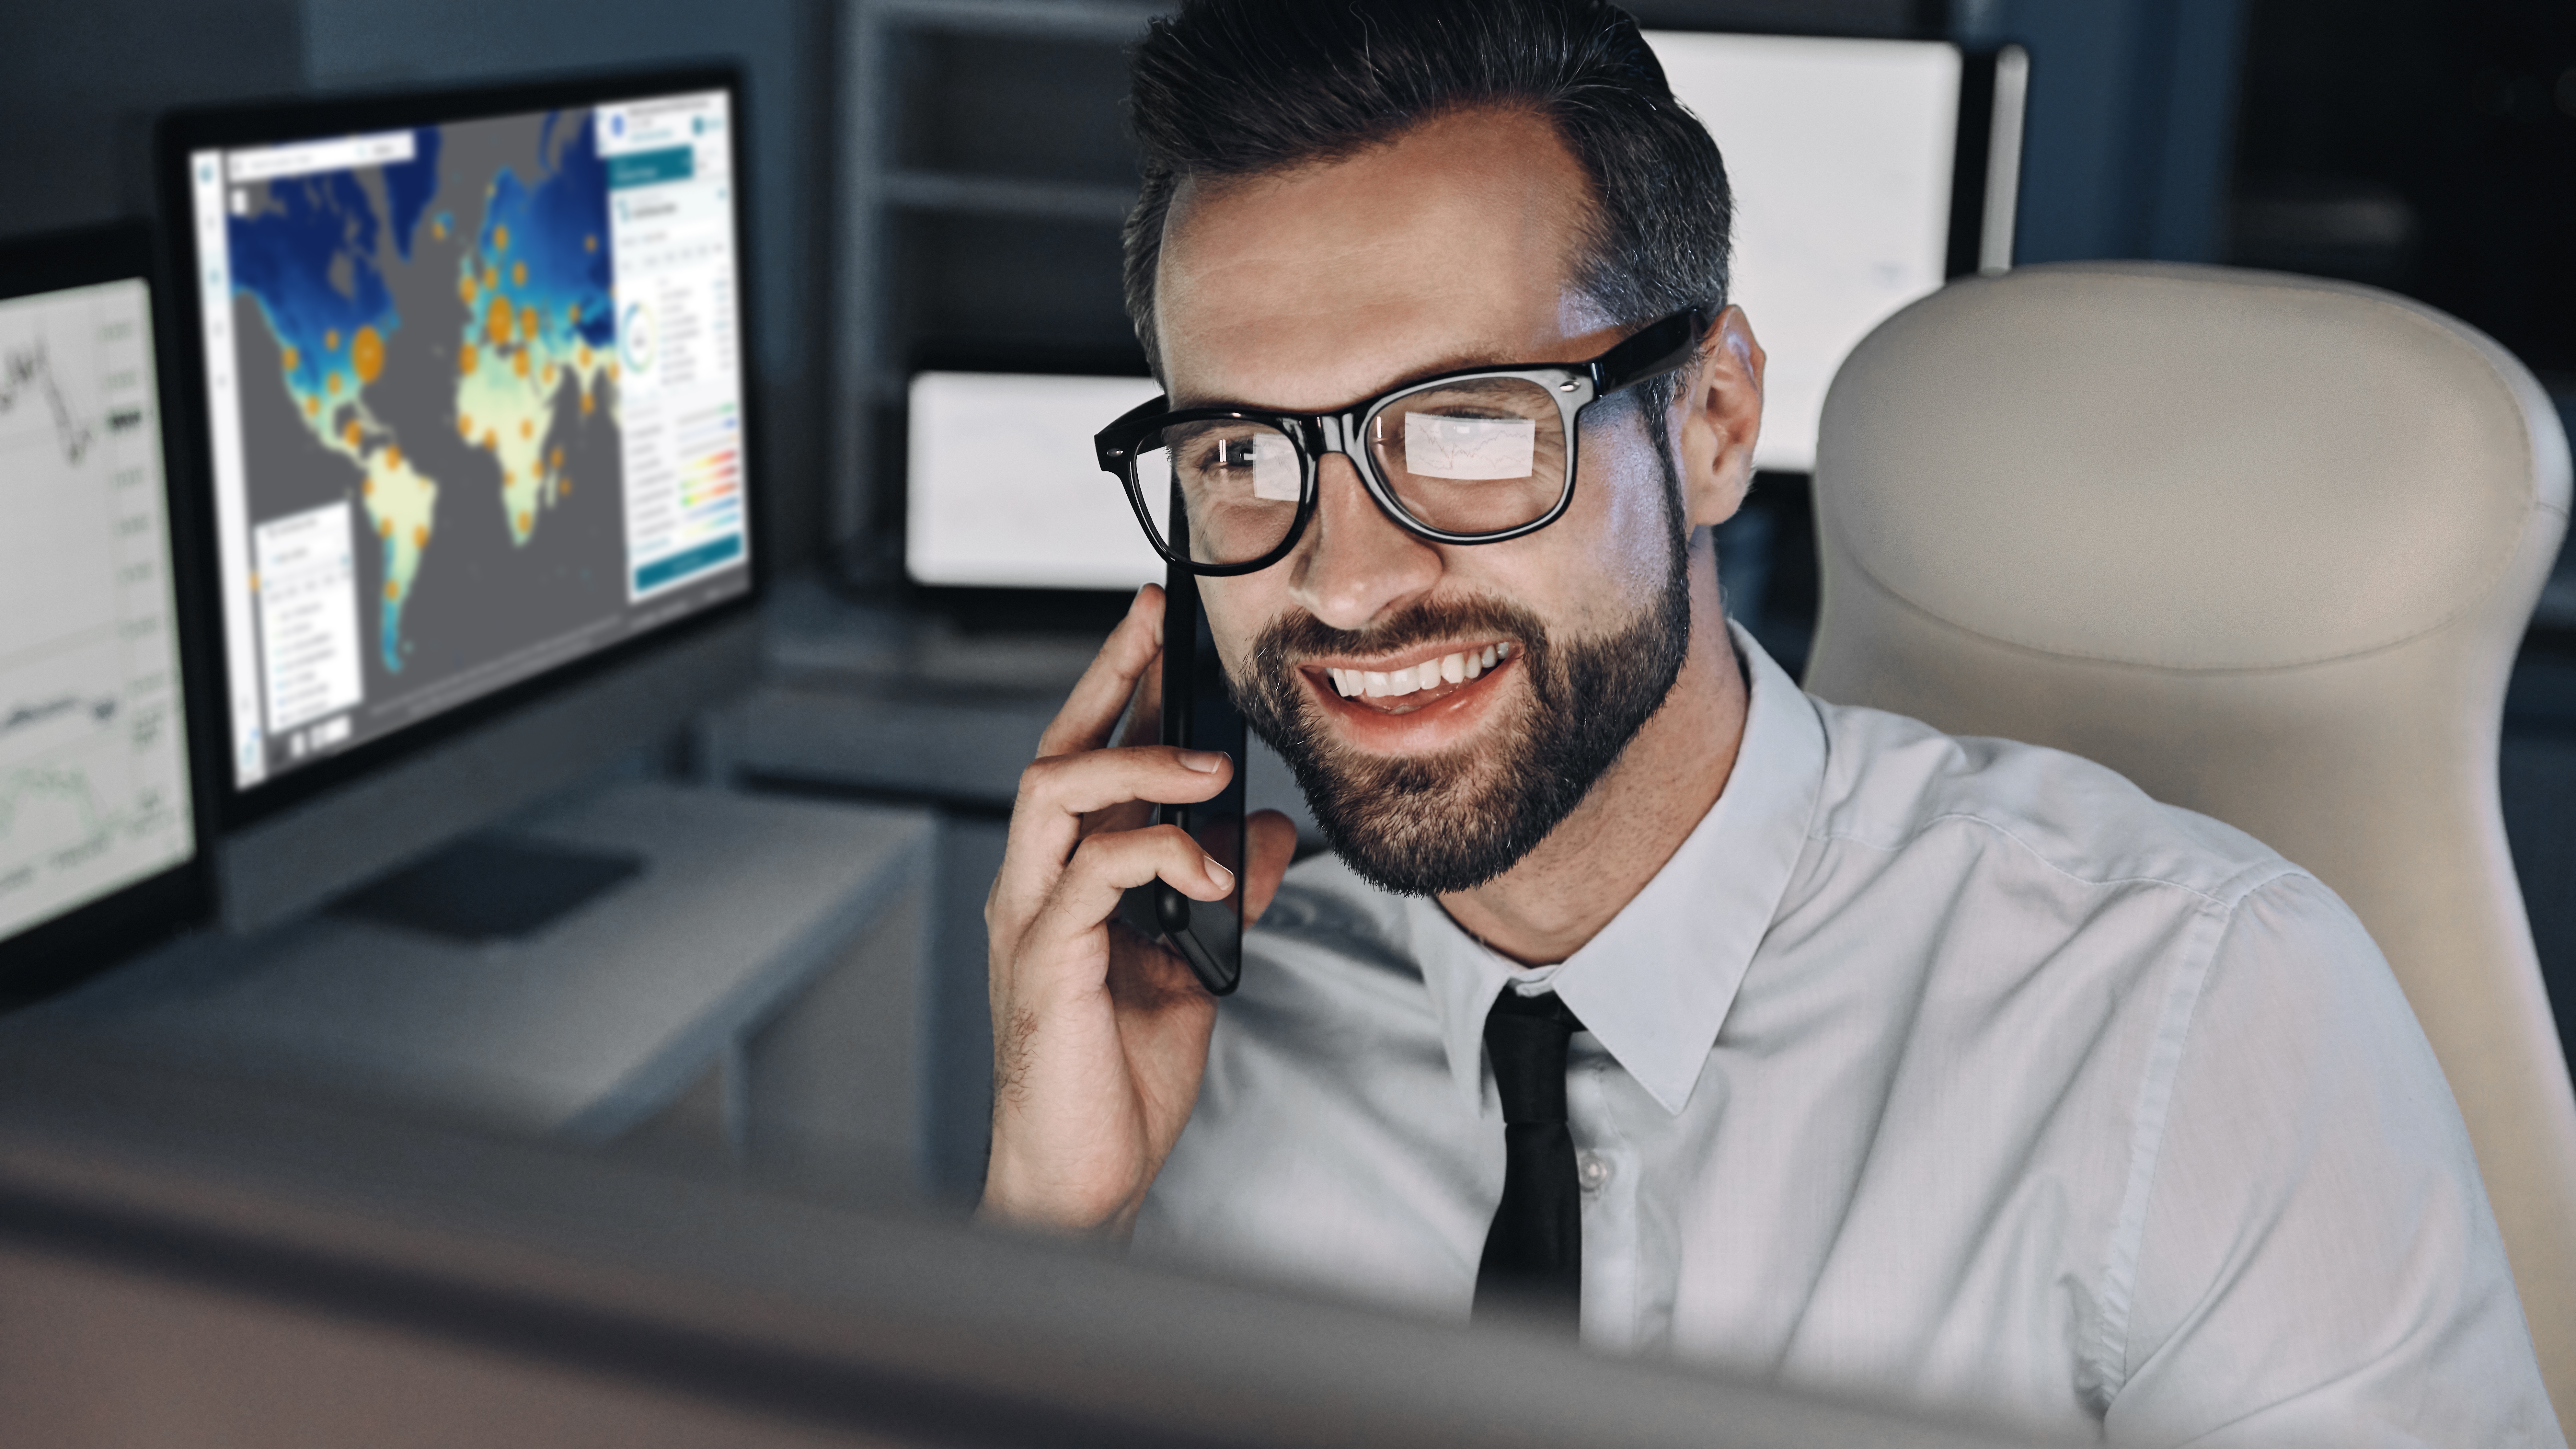 Smiling businessman talking on mobile phone and looking at computer screen in office